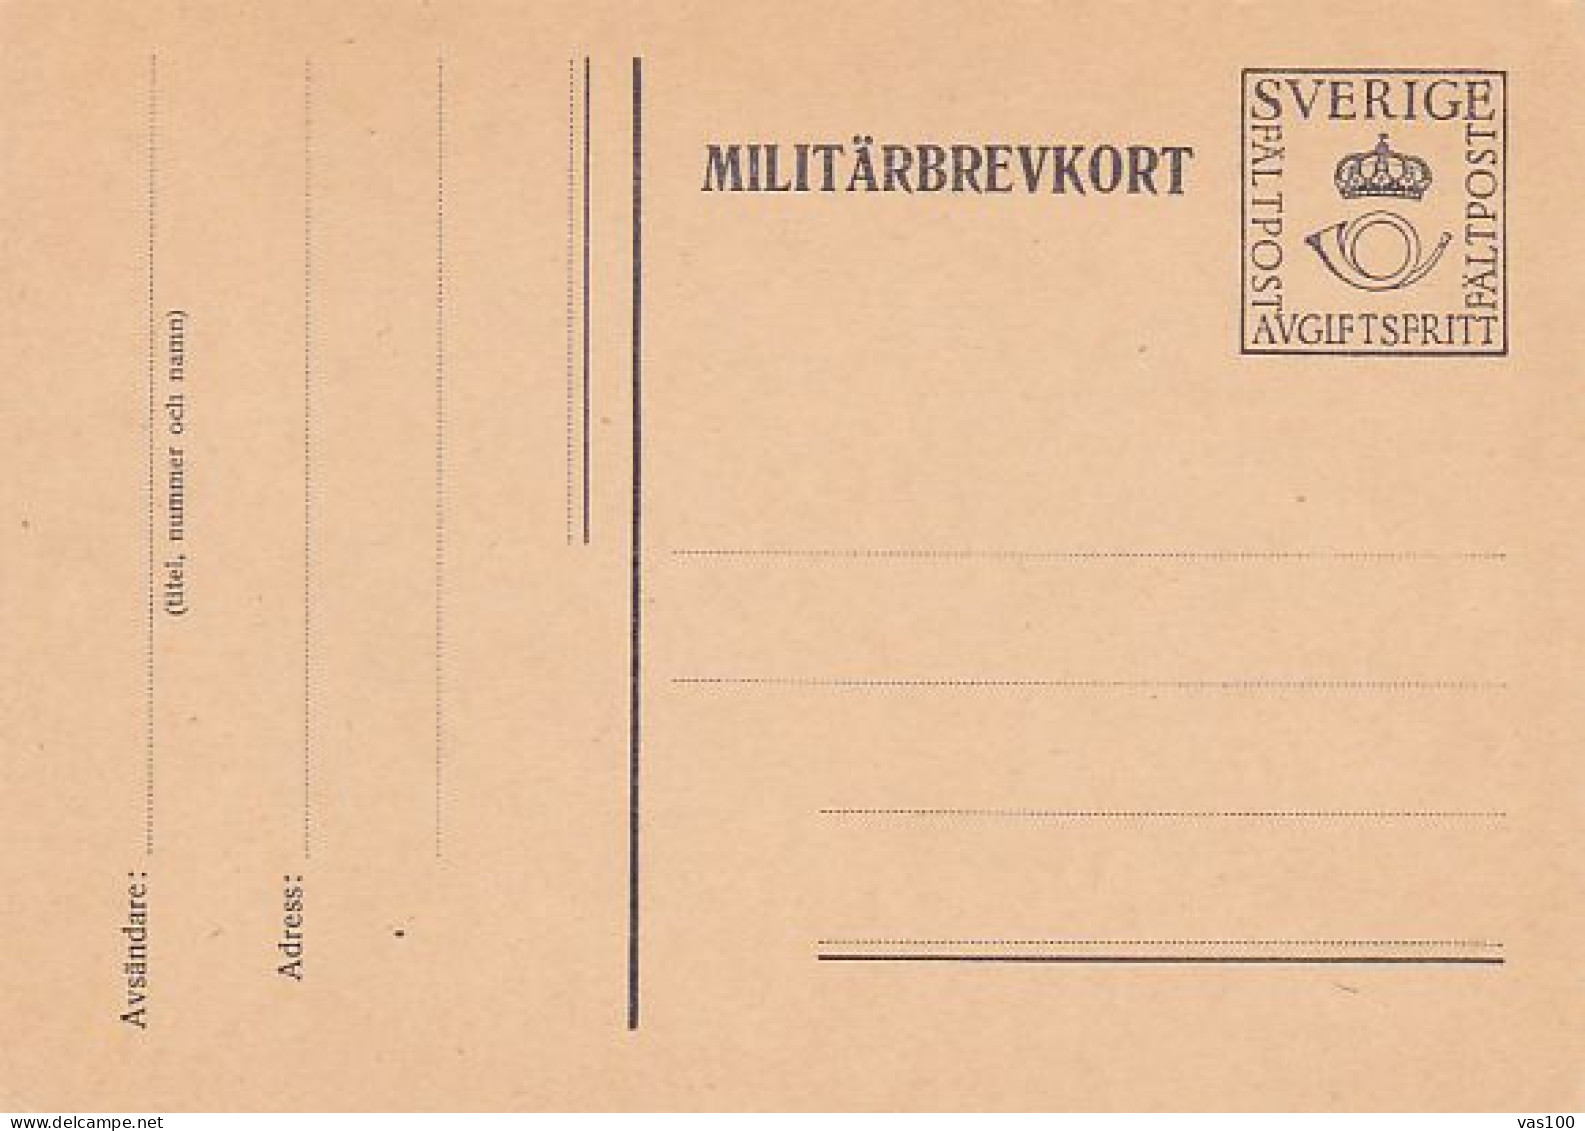 FREE OF CHARGE MILITARY FIELD POST PC STATIONERY, ENTIER POSTAL, UNUSED, SWEDEN - Military